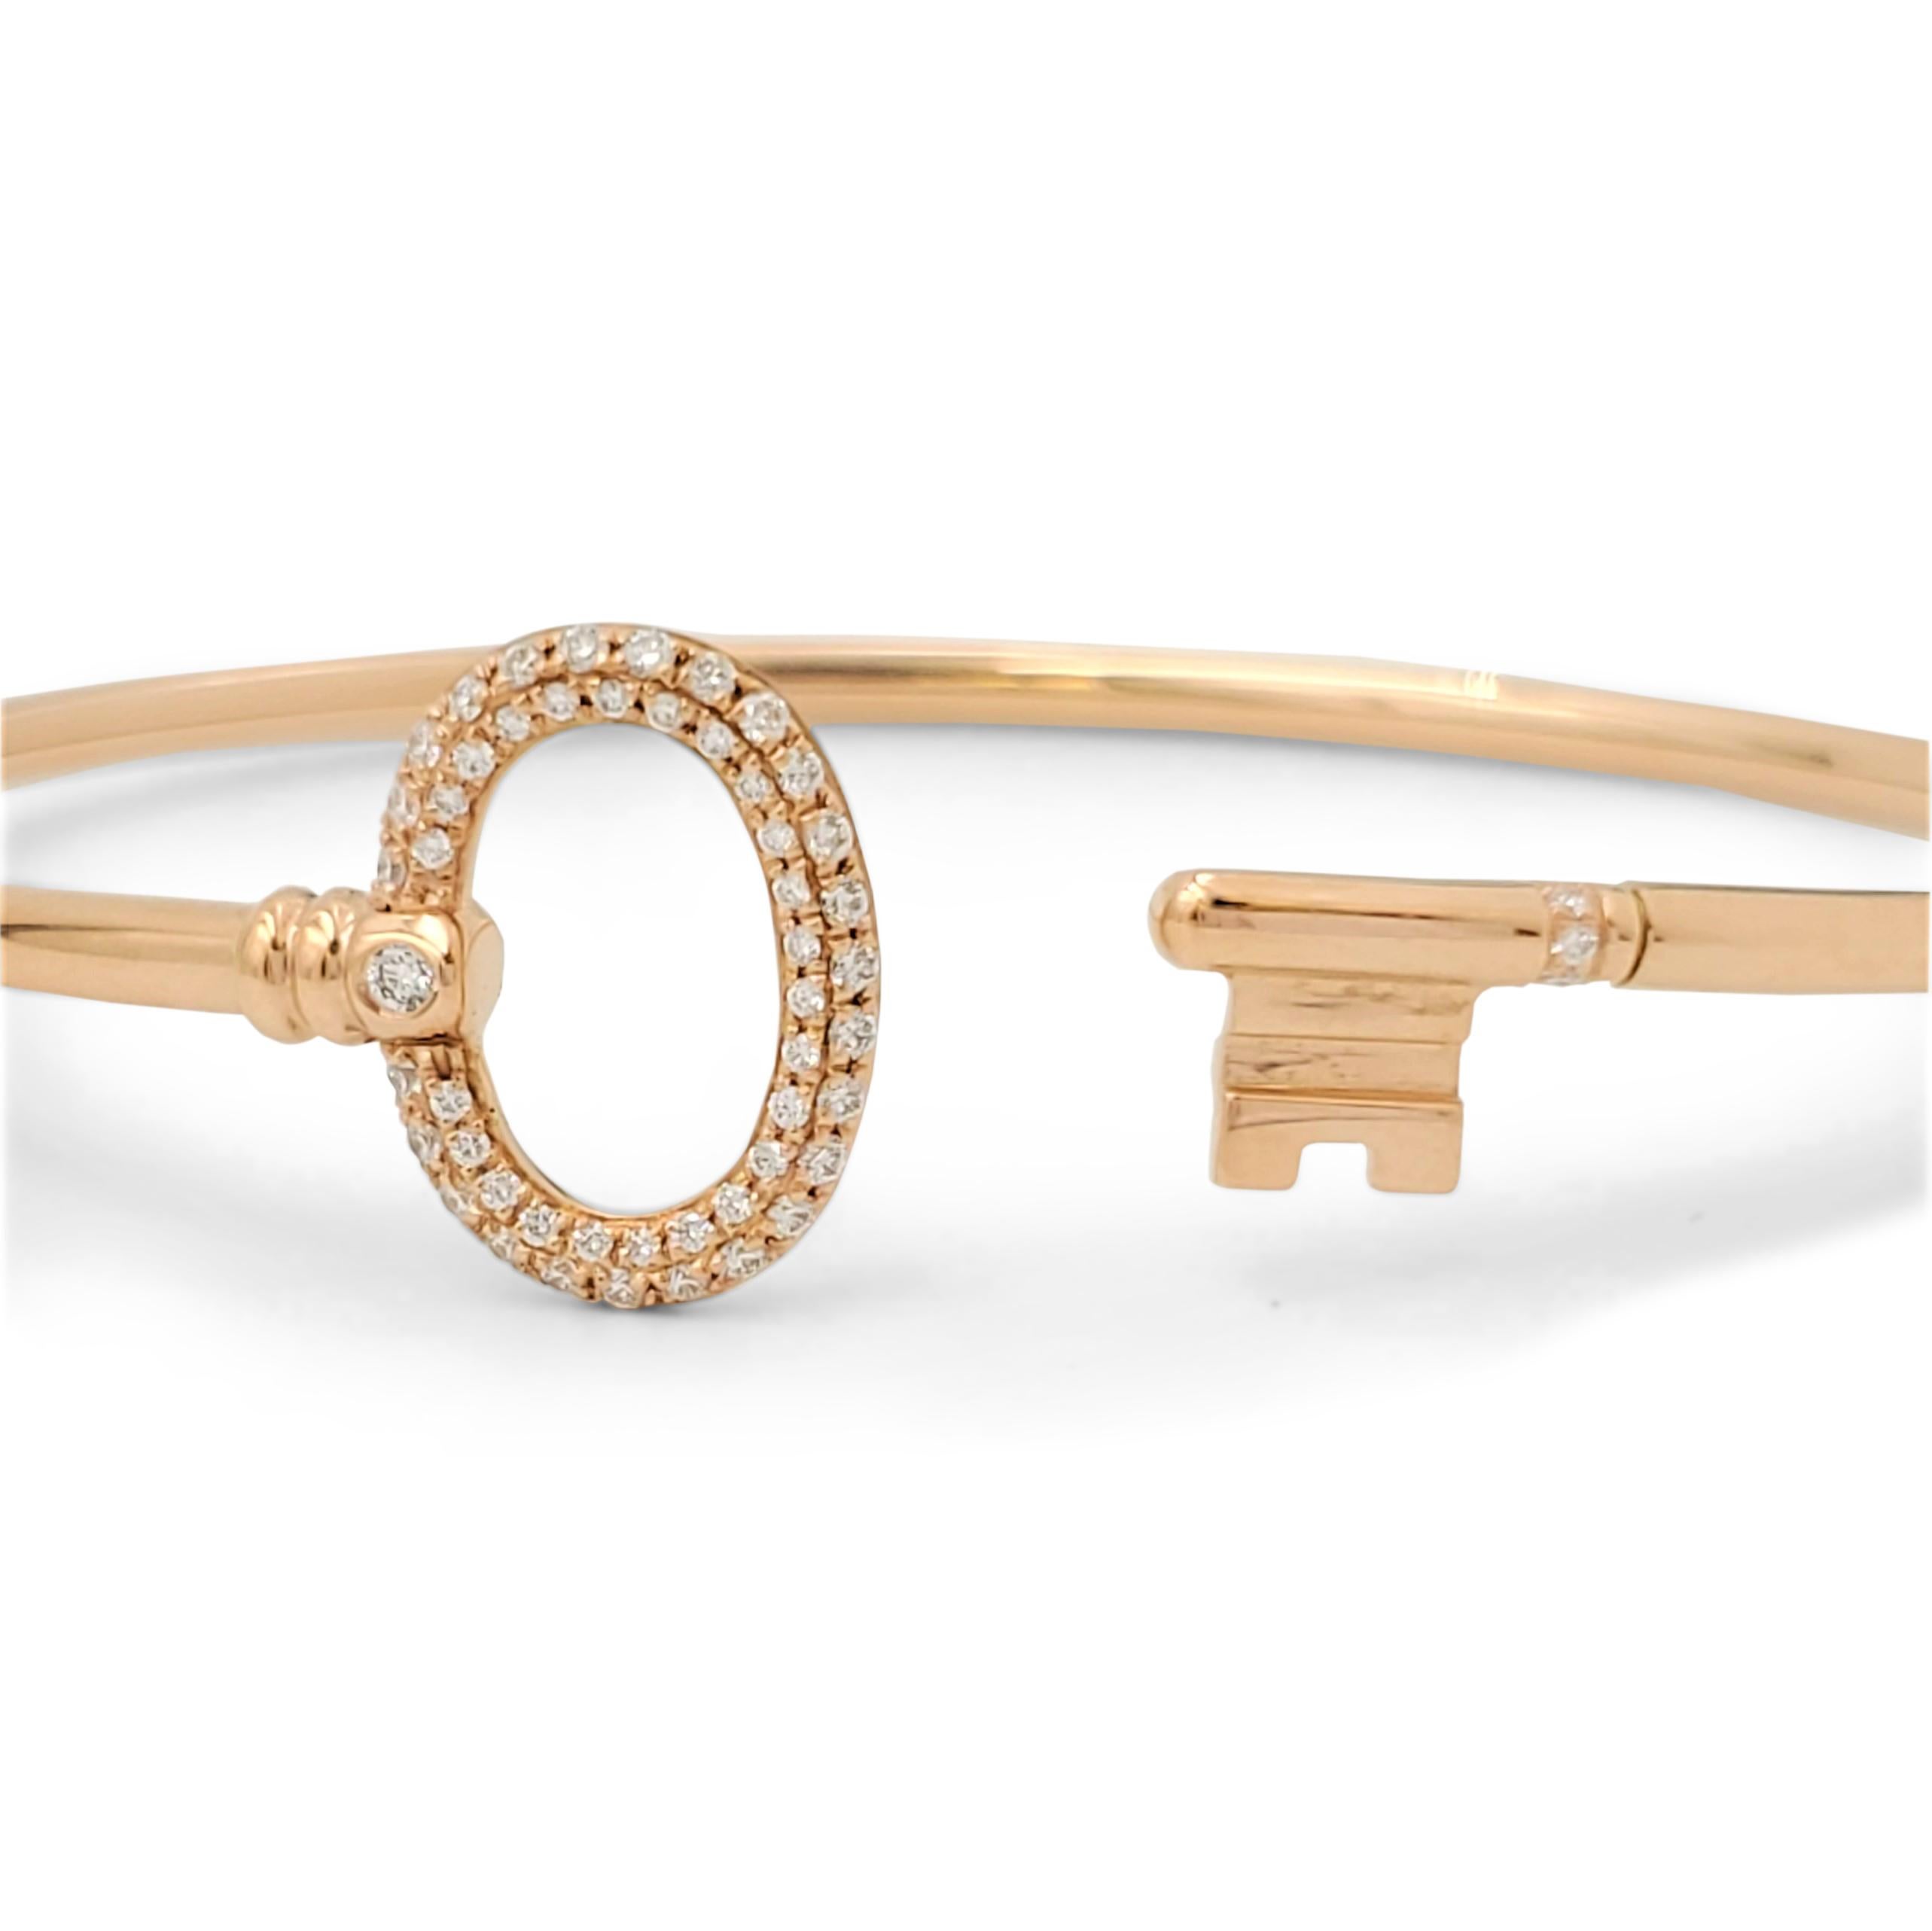 Authentic Tiffany & Co. bracelet from the 'Tiffany Keys' collection crafted in 18 karat rose gold. Pavé set round brilliant cut diamonds weighing an estimated 0.25 carats trace the elegant design. Signed T&Co., Au750, Italy. The bracelet is not